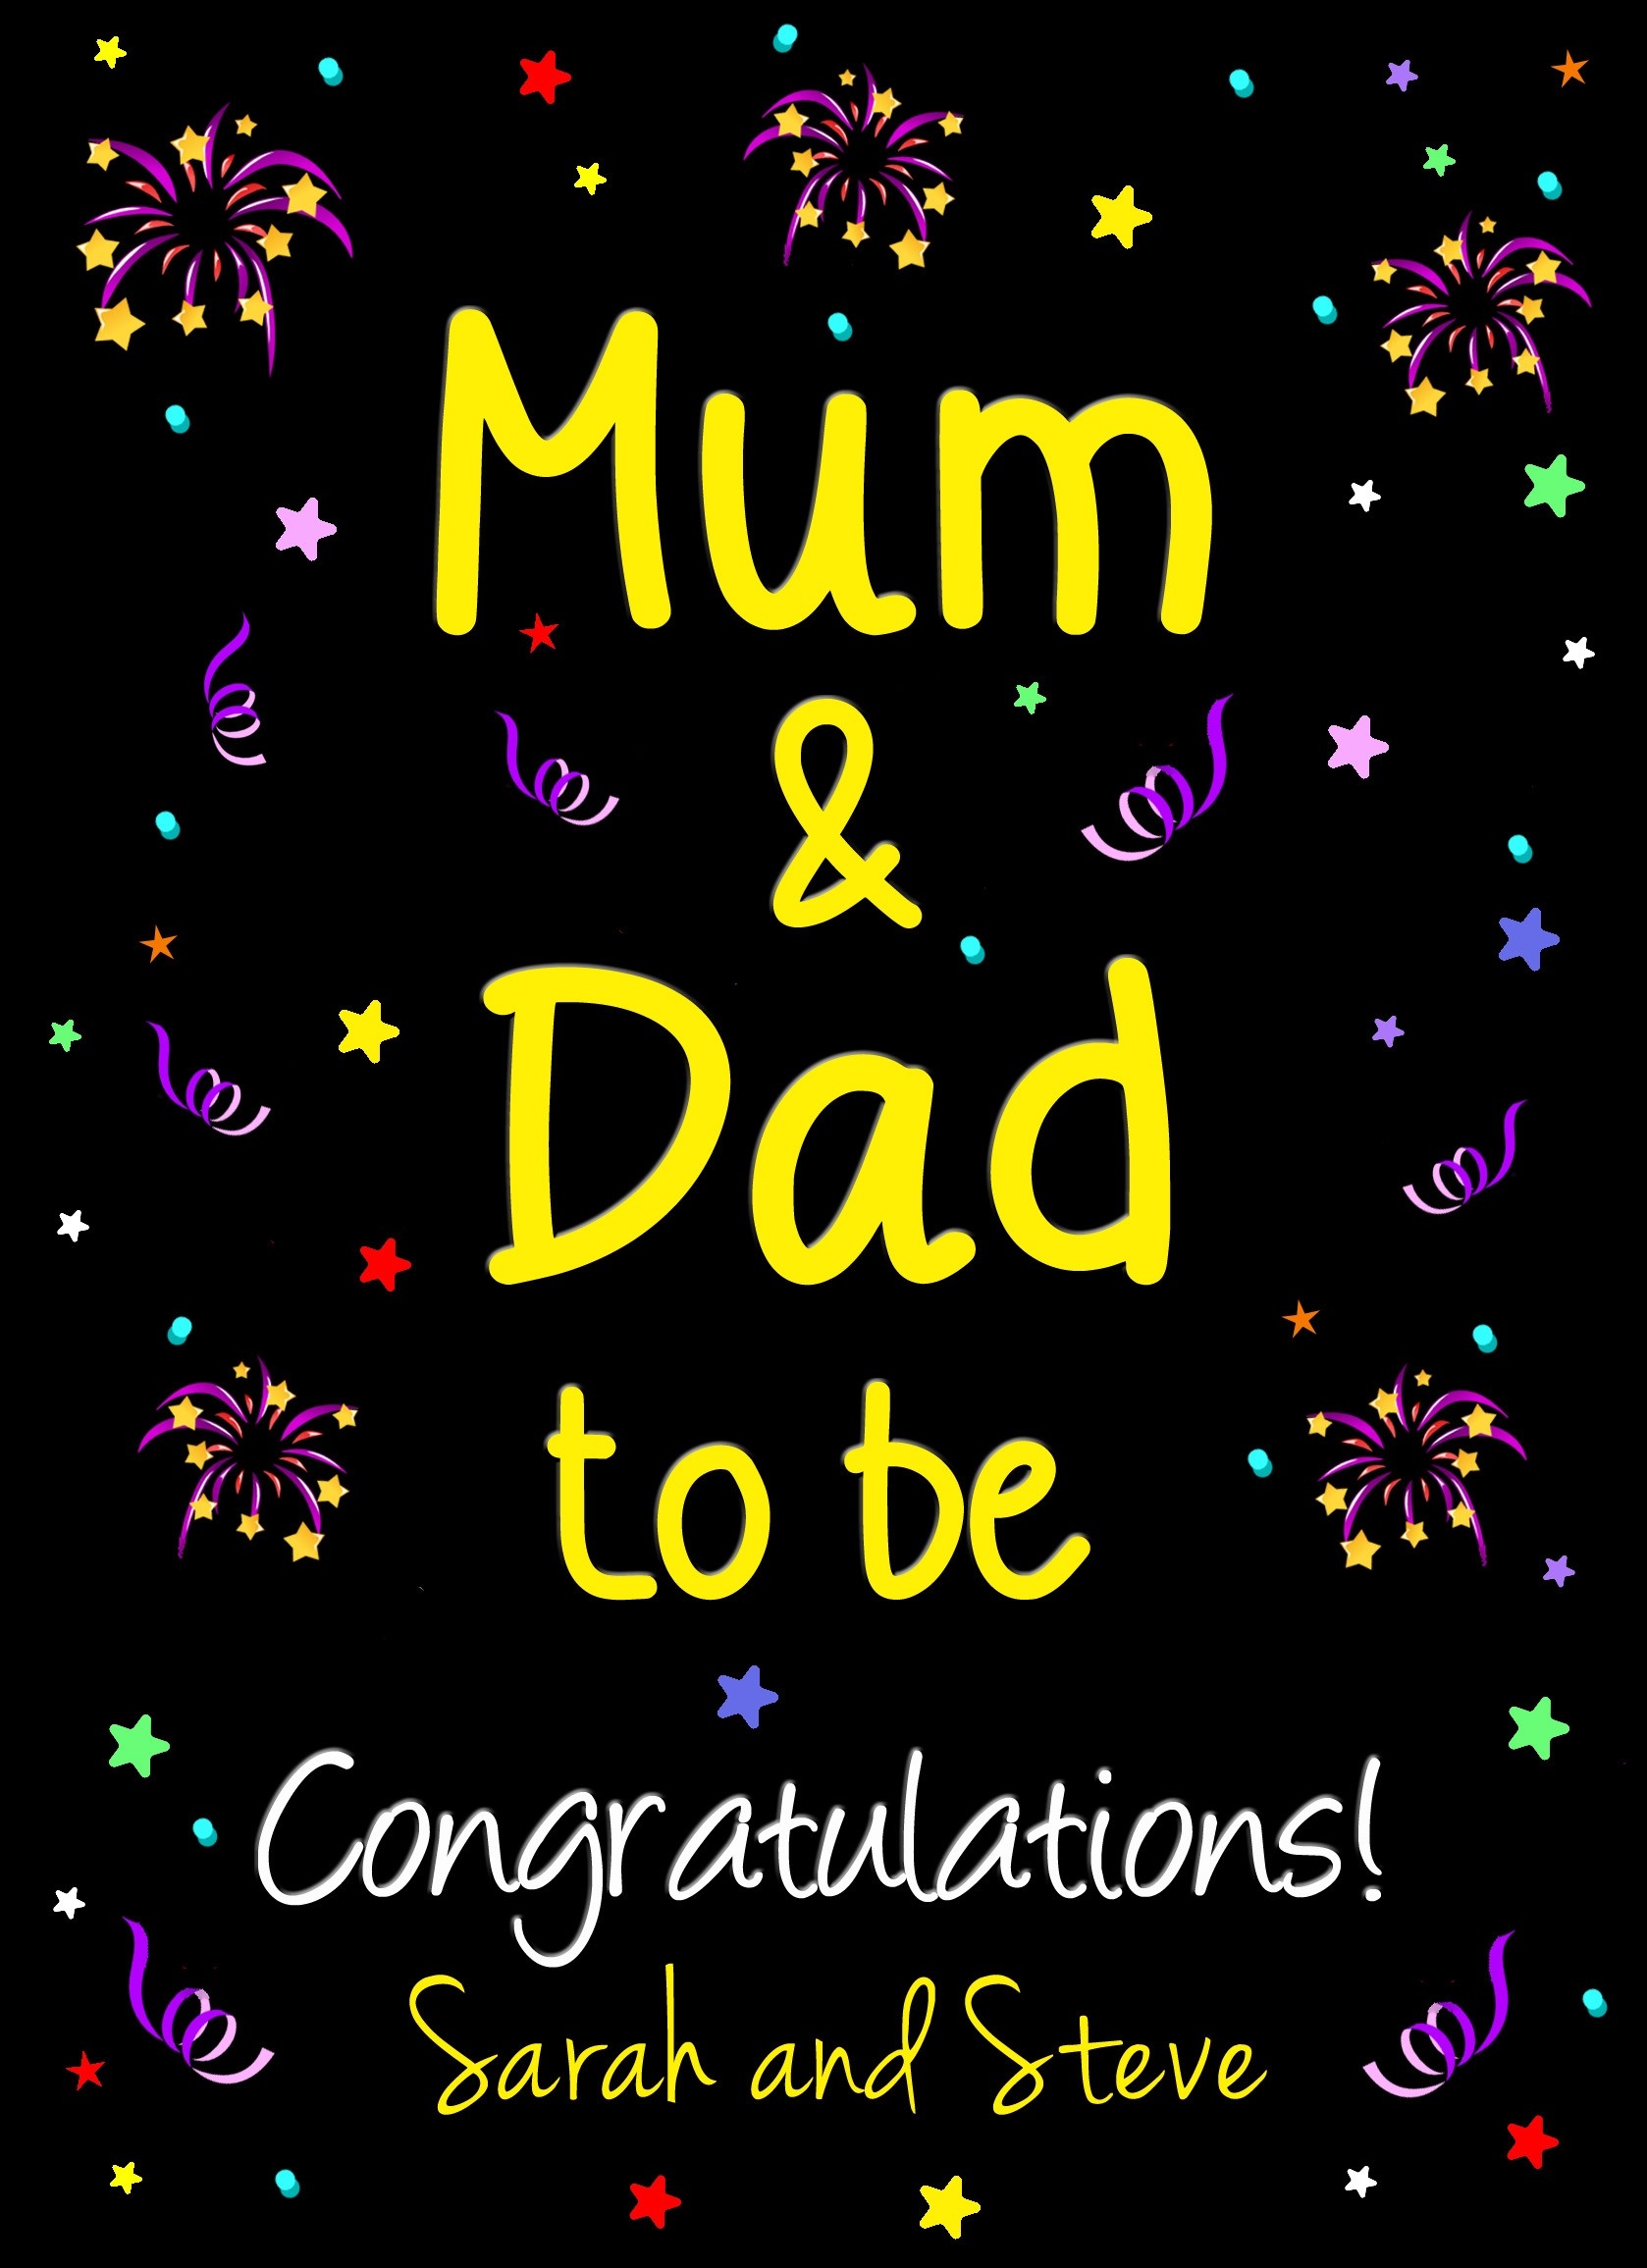 Personalised 'Mum and Dad to be' Baby Pregnancy Congratulations Card 